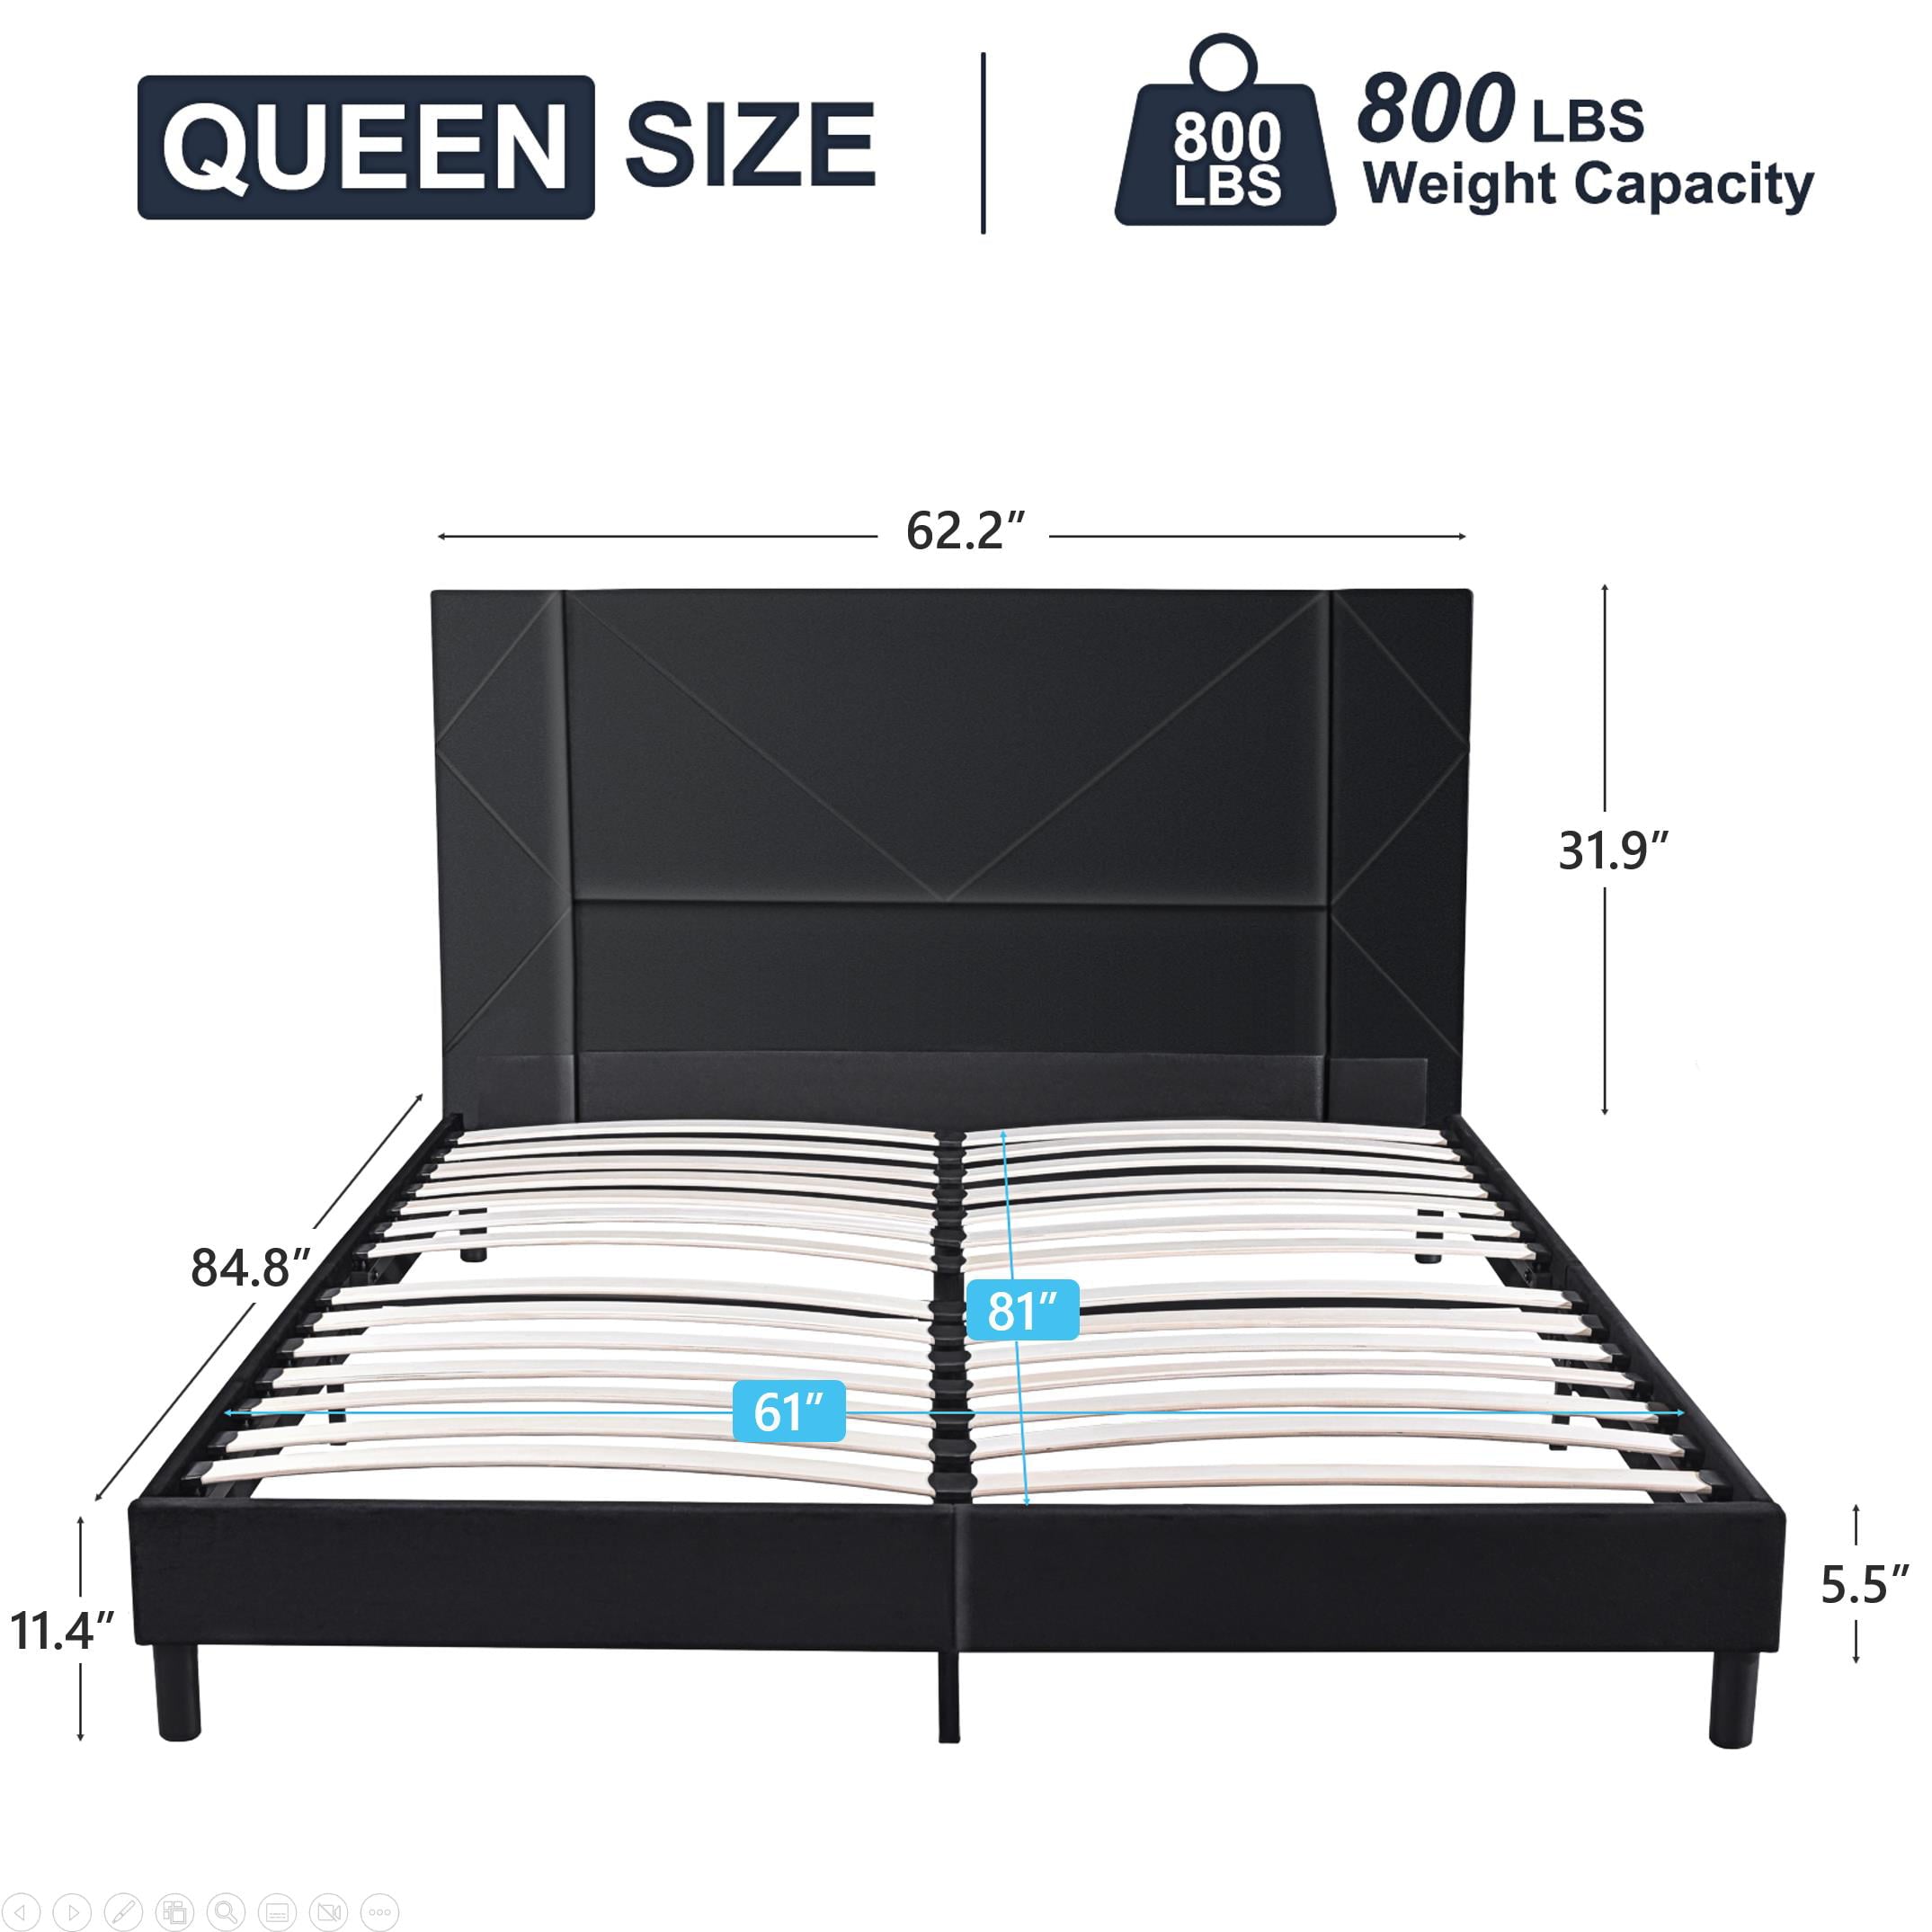 uhomepro Black Queen Bed Frame for Adults Kids, Modern Velvet Upholstered Platform Bed Frame with Headboard, Queen Size Bed Frame Bedroom Furniture with Wood Slats Support, No Box Spring Needed